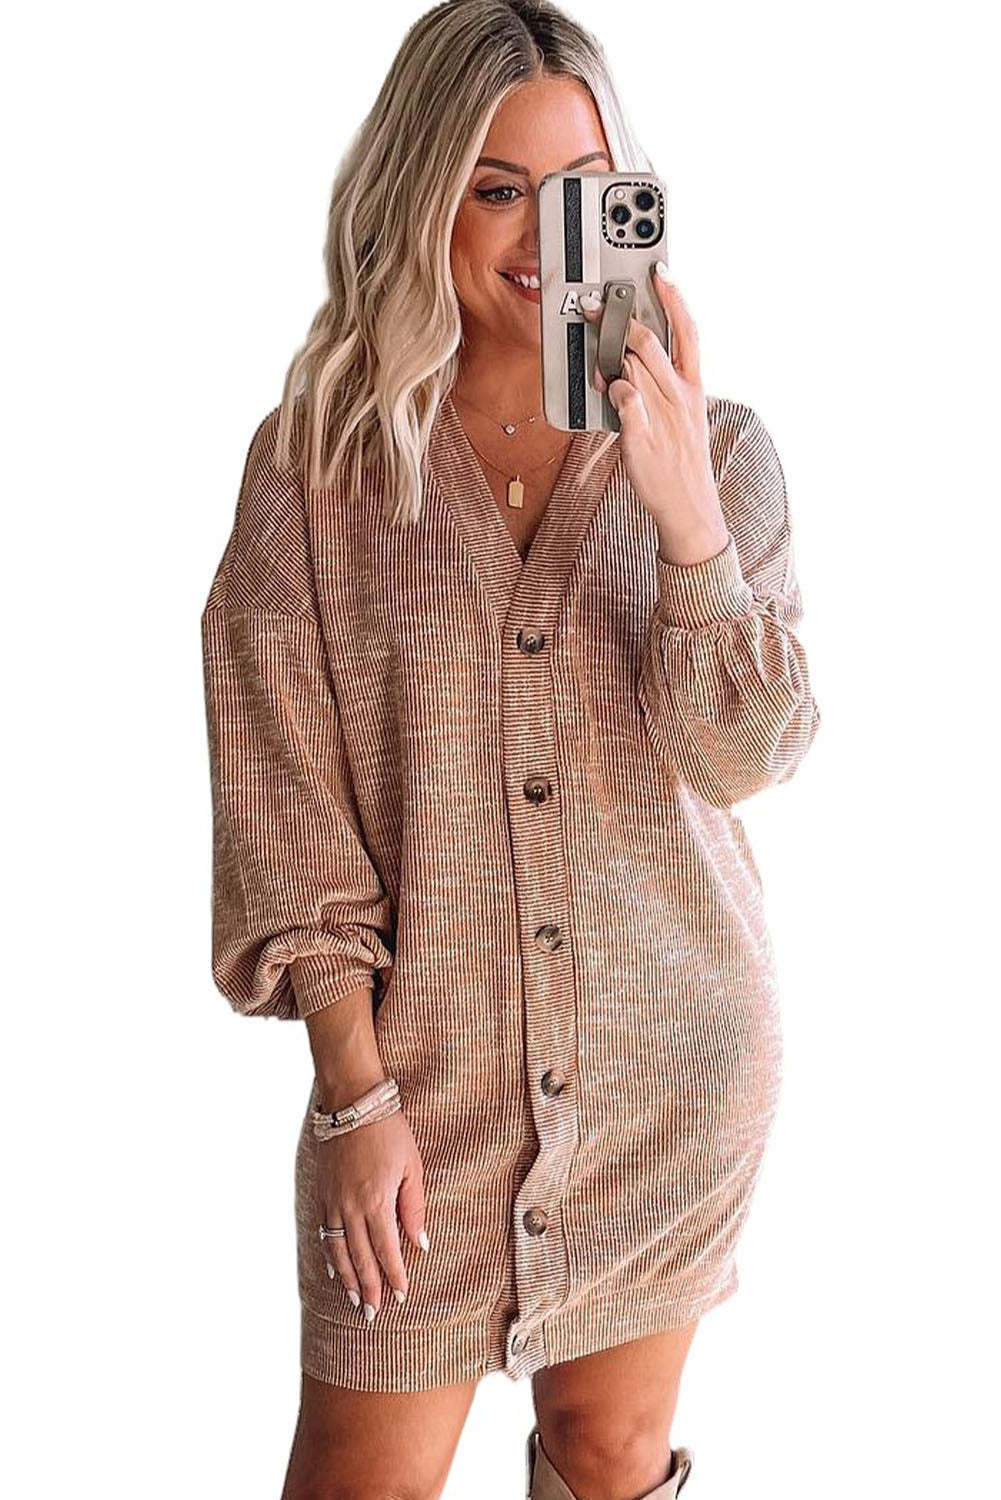 V-Neck Dropped Shoulder Cardigan - Women’s Clothing & Accessories - Shirts & Tops - 3 - 2024